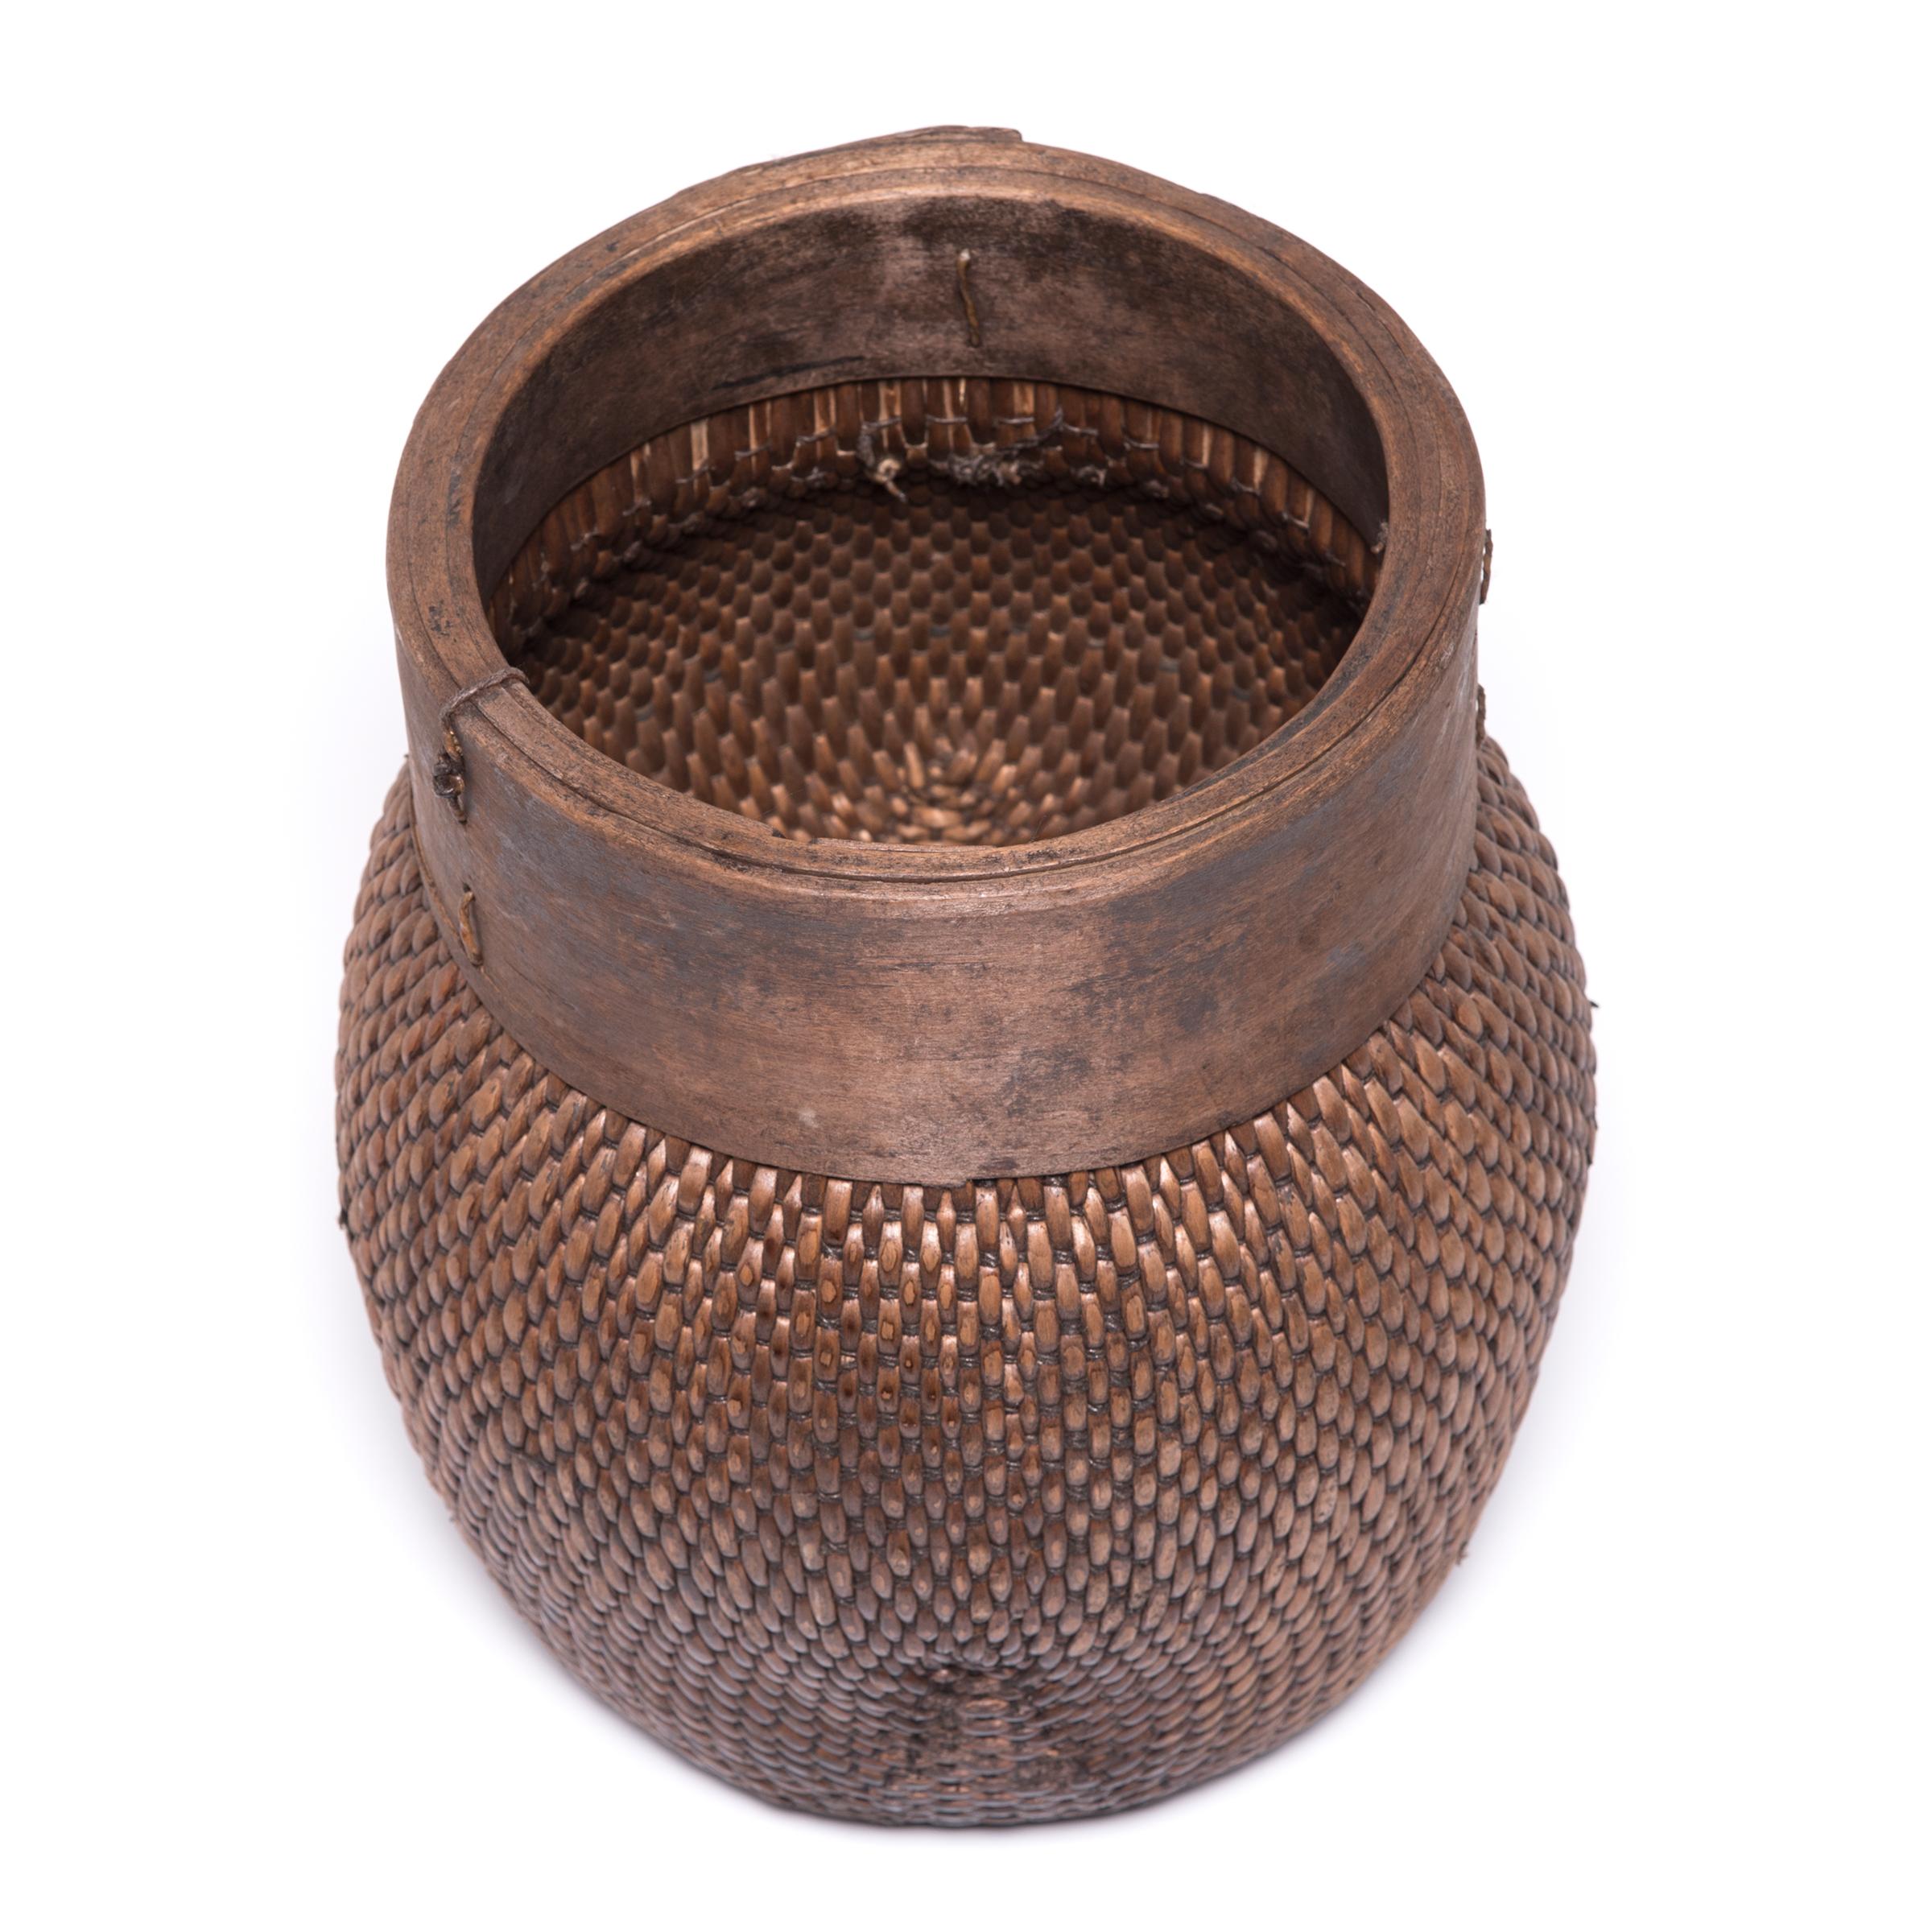 This listing includes one Chinese fisherman's basket, c. 1900 (LU820023013372) and one Chinese pickling basin, c. 1900 (LU820018130802). 